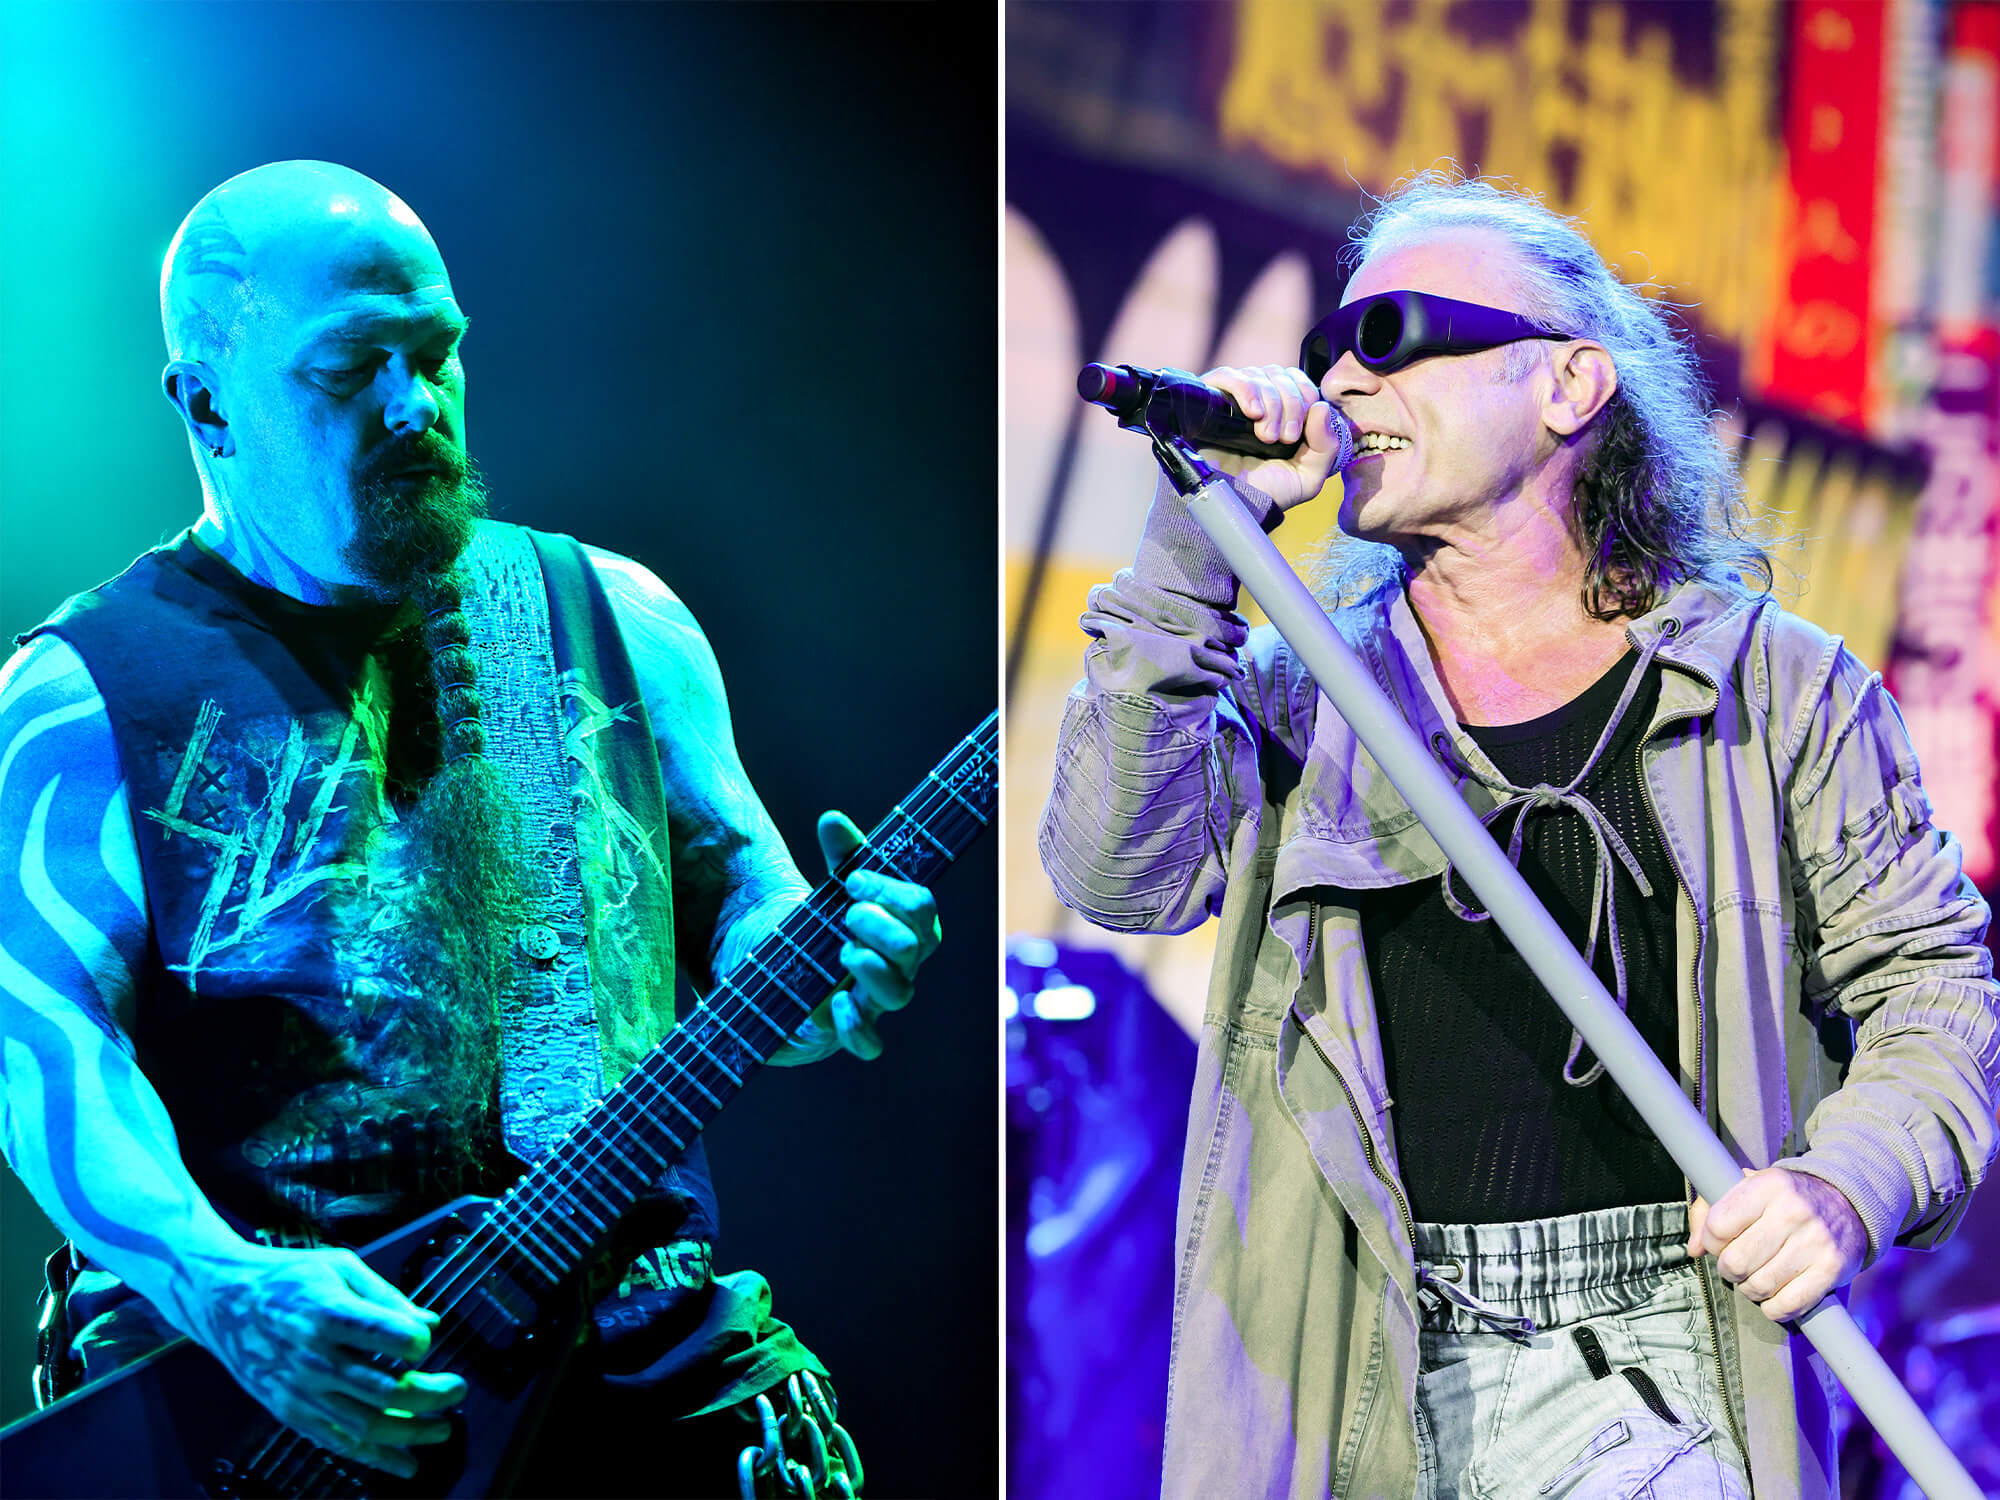 Kerry King (left) and Bruce Dickinson (right) both captured on stage.